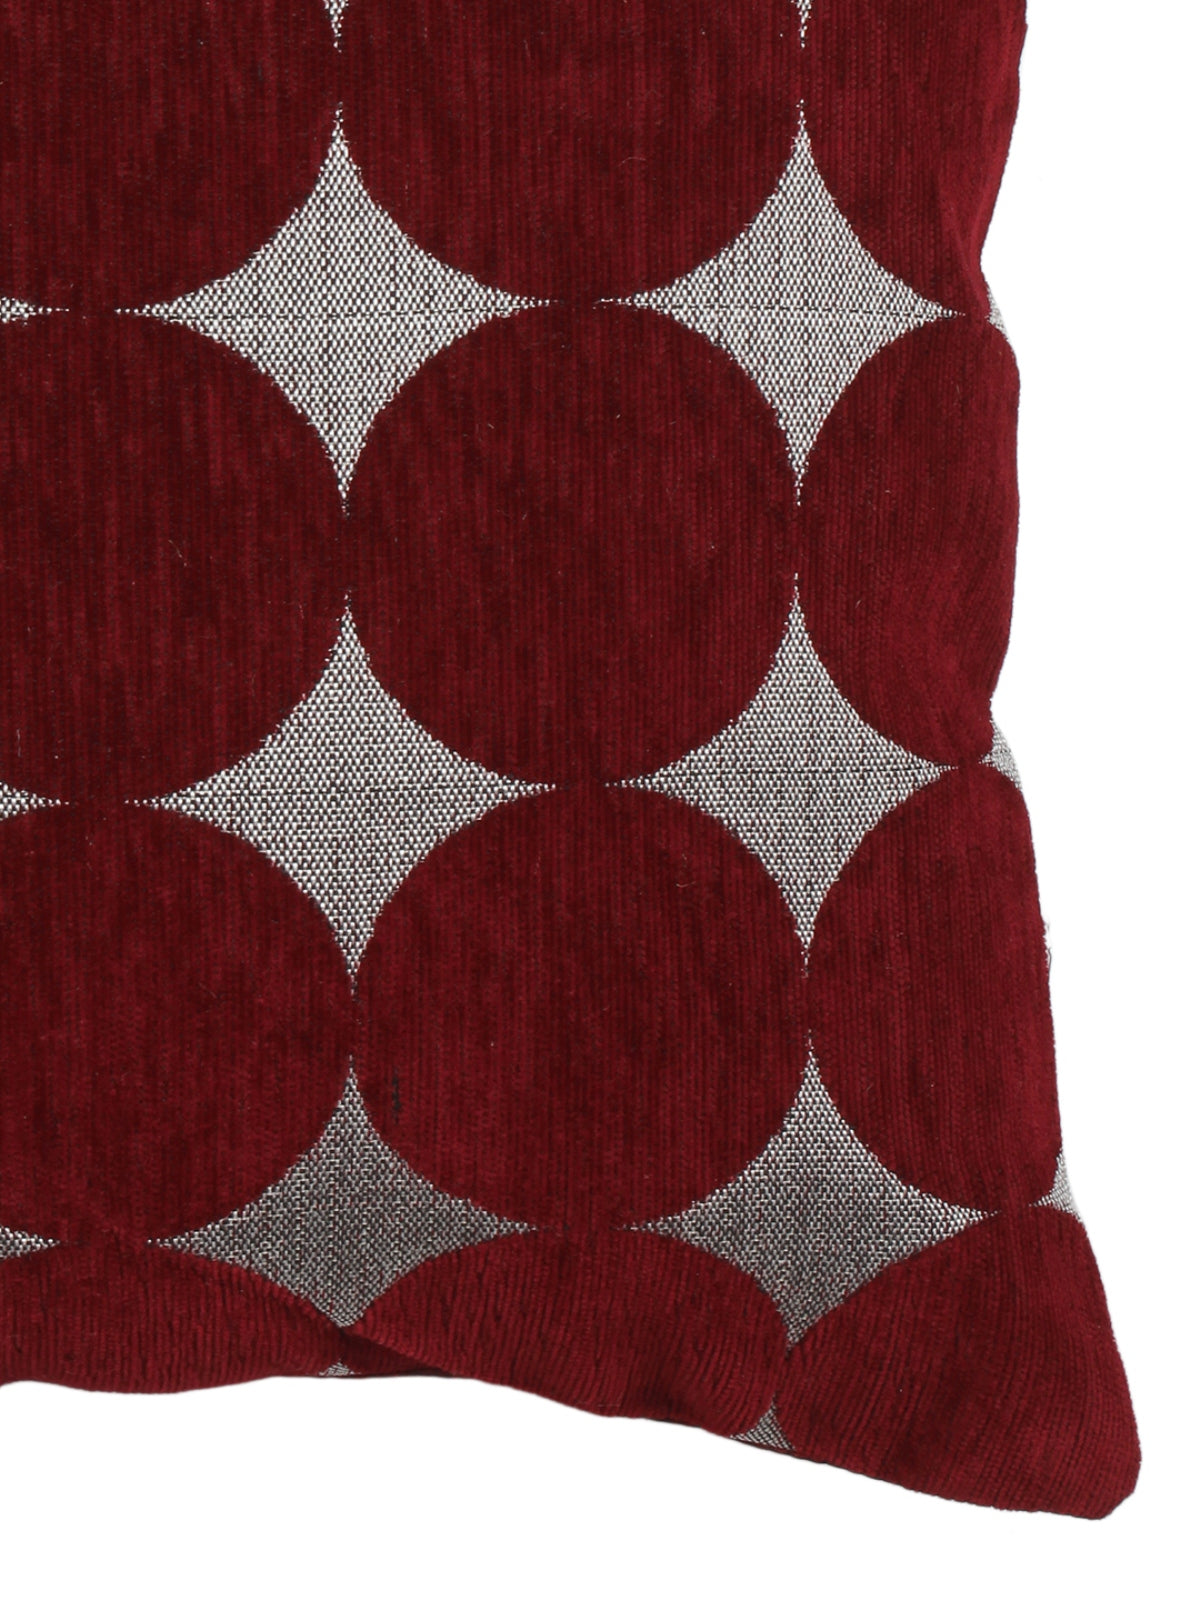 Polyester Velvet Fabric Geometric Printed Cushion Cover 16x16 Set of 5 - Maroon